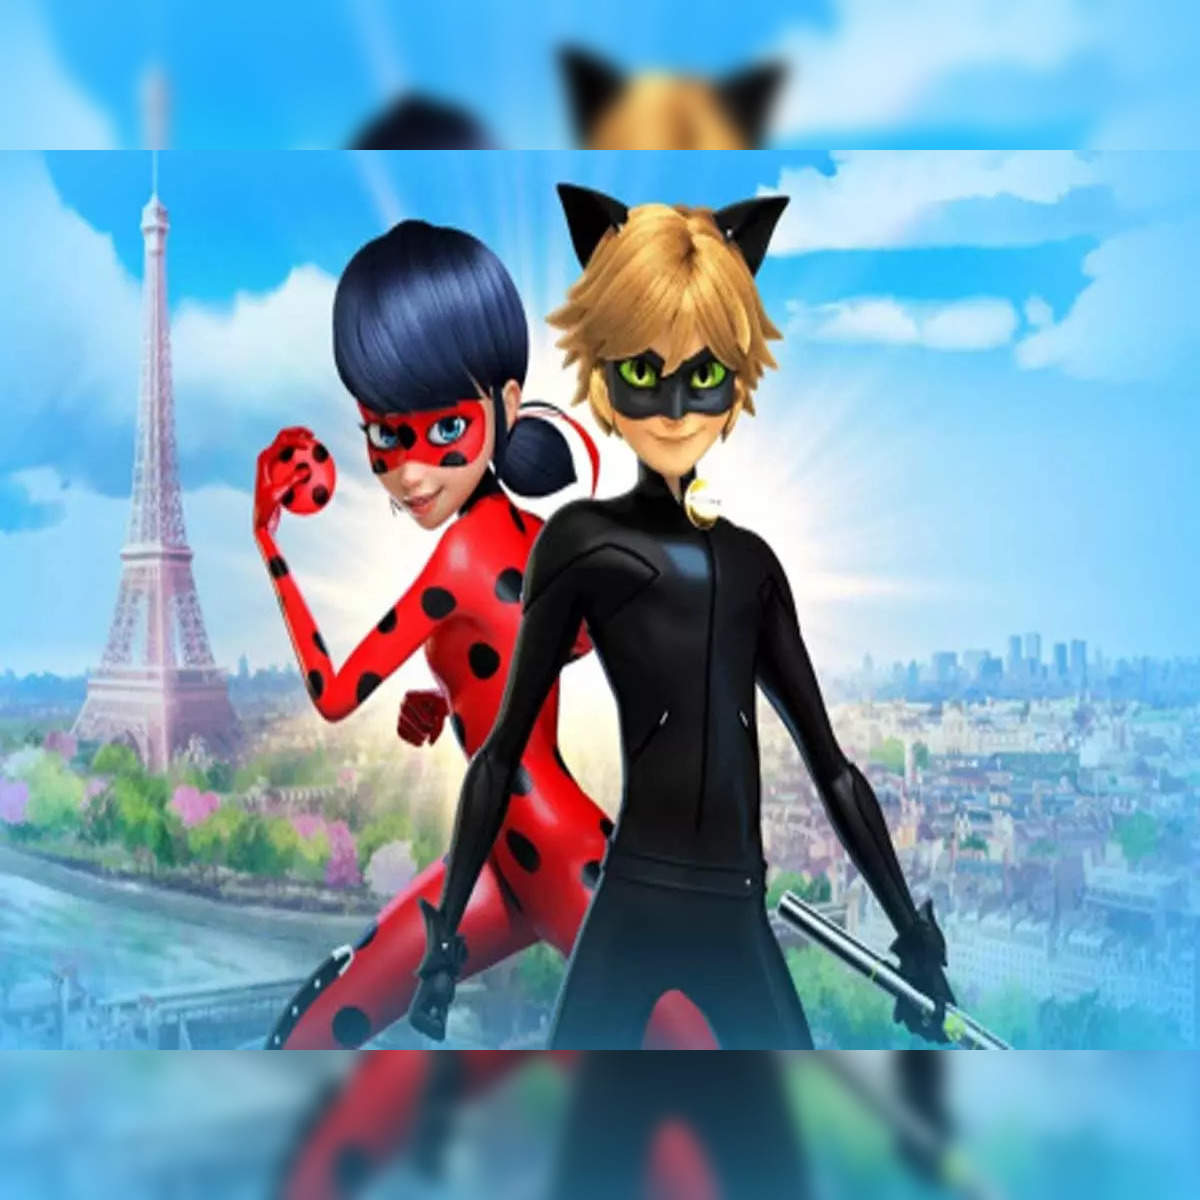 cj mauricio add show me a picture of miraculous ladybug photo